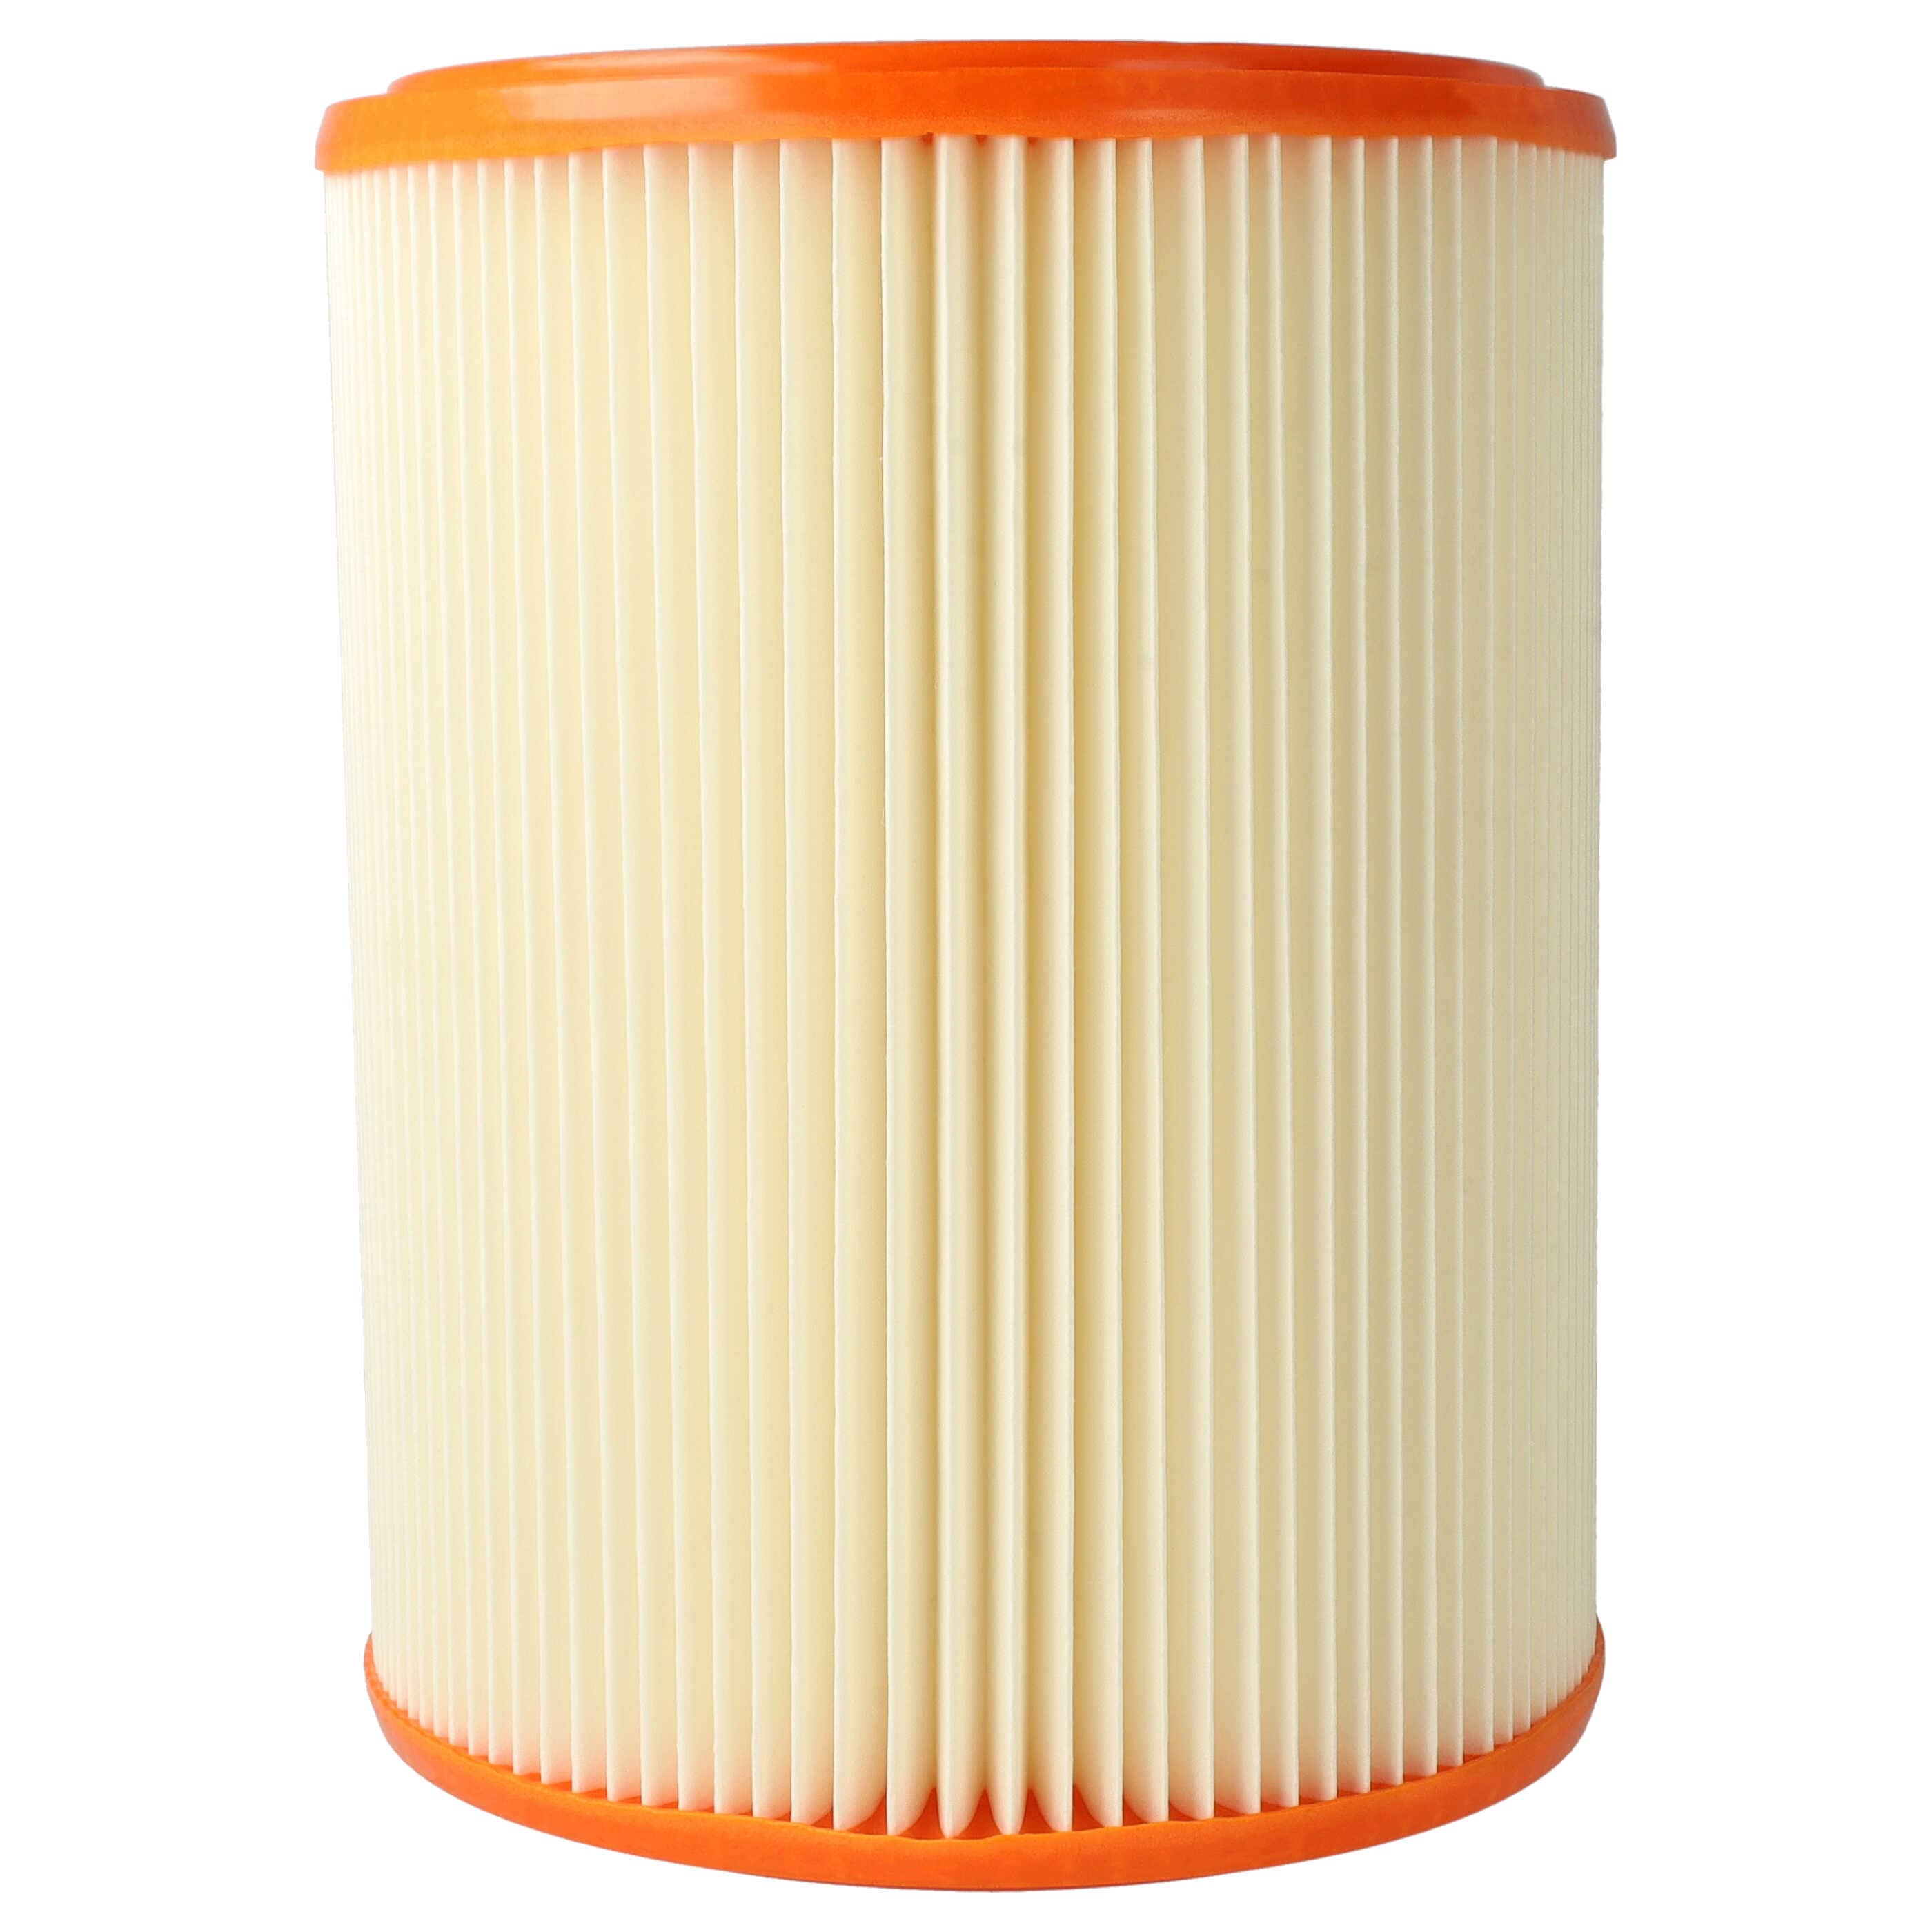 1x pleated filter replaces Festool 486241 for BoschVacuum Cleaner